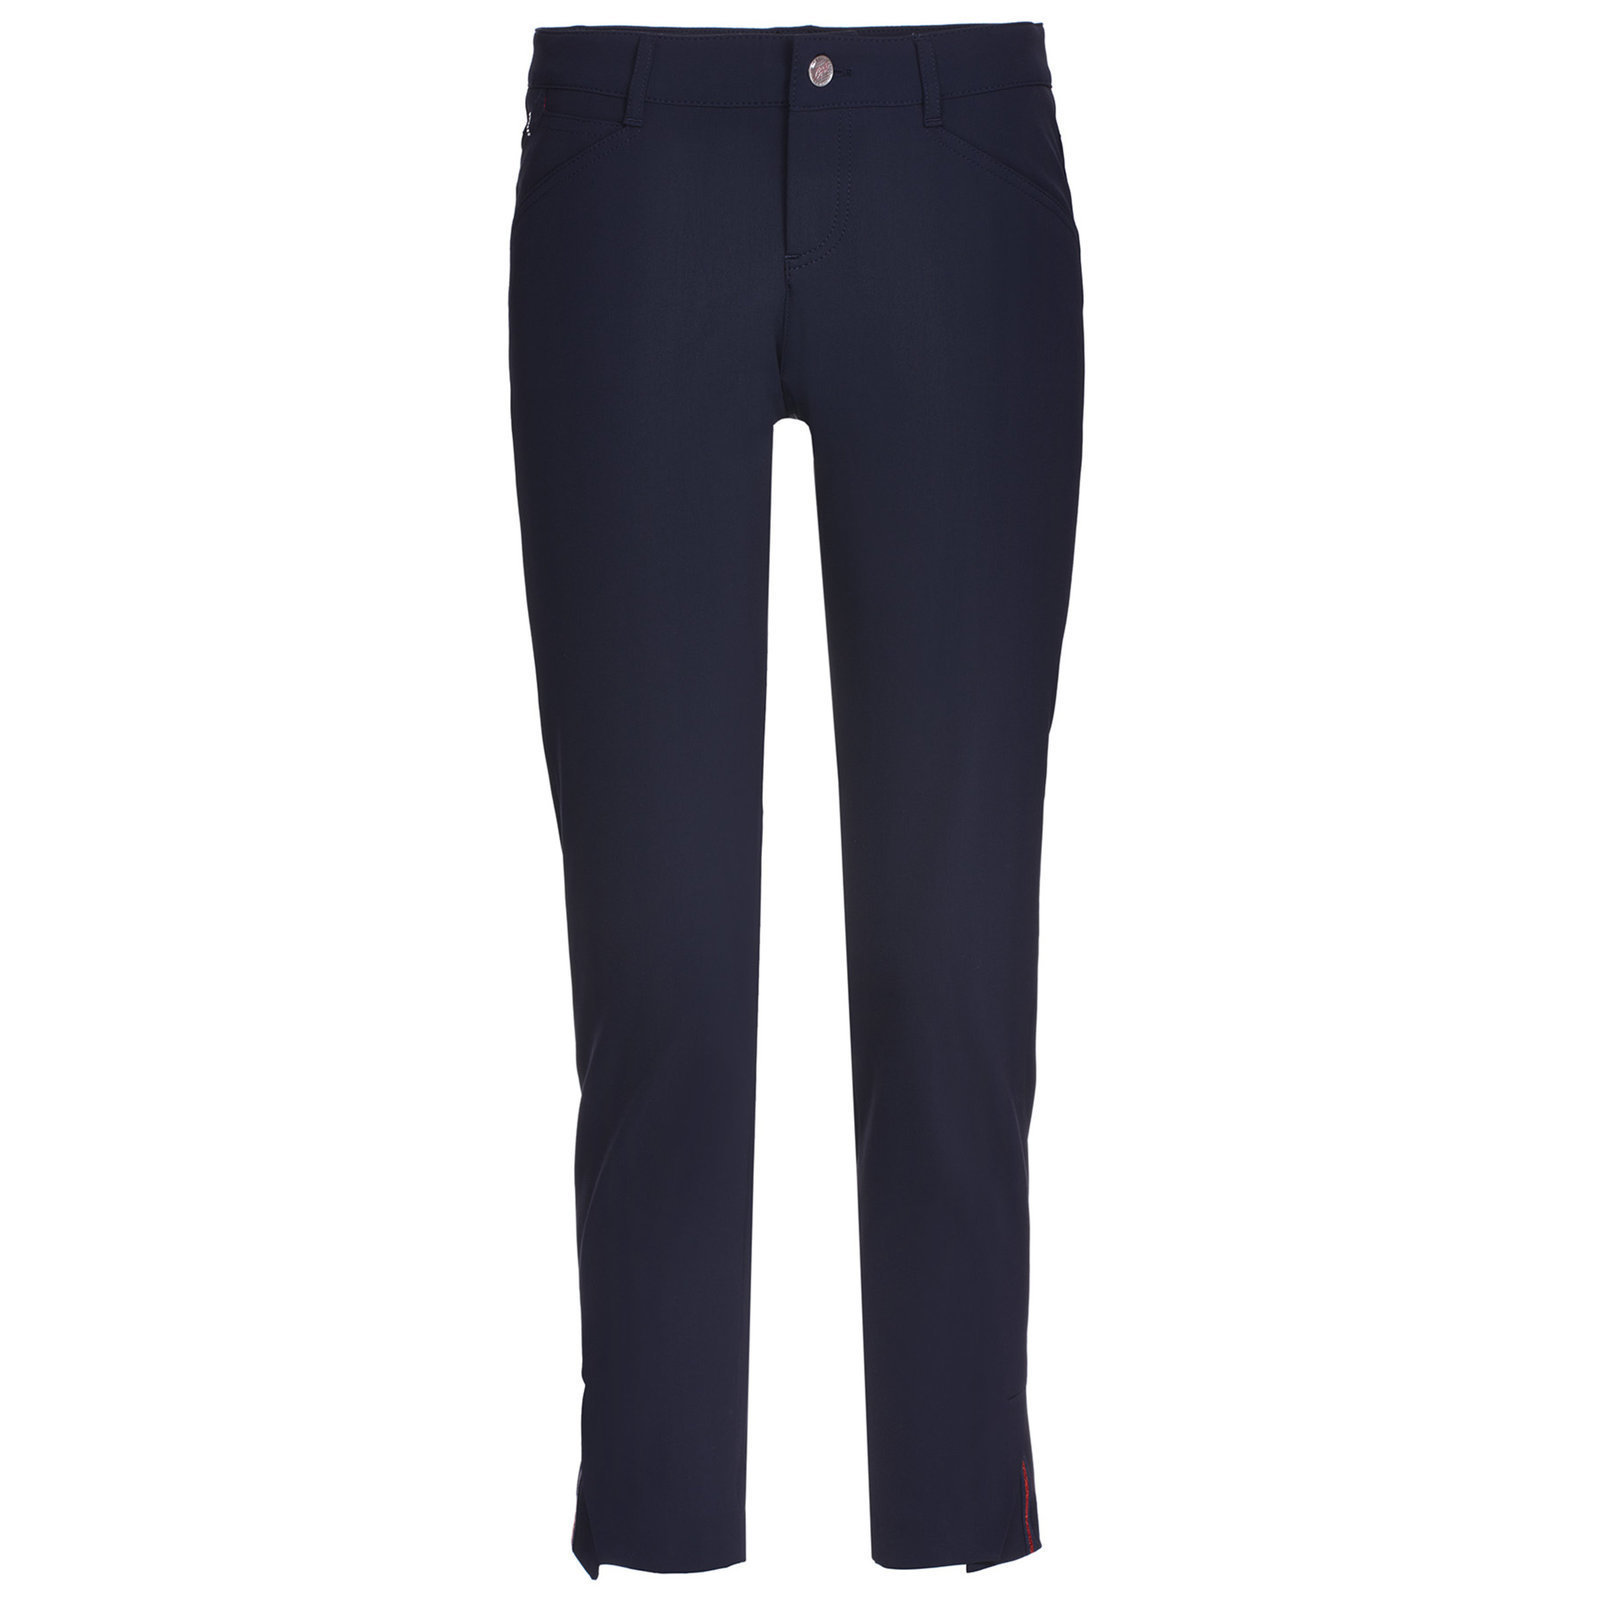 Trousers Alberto Mona-B 3xDRY Cooler Womens Trousers Navy 36